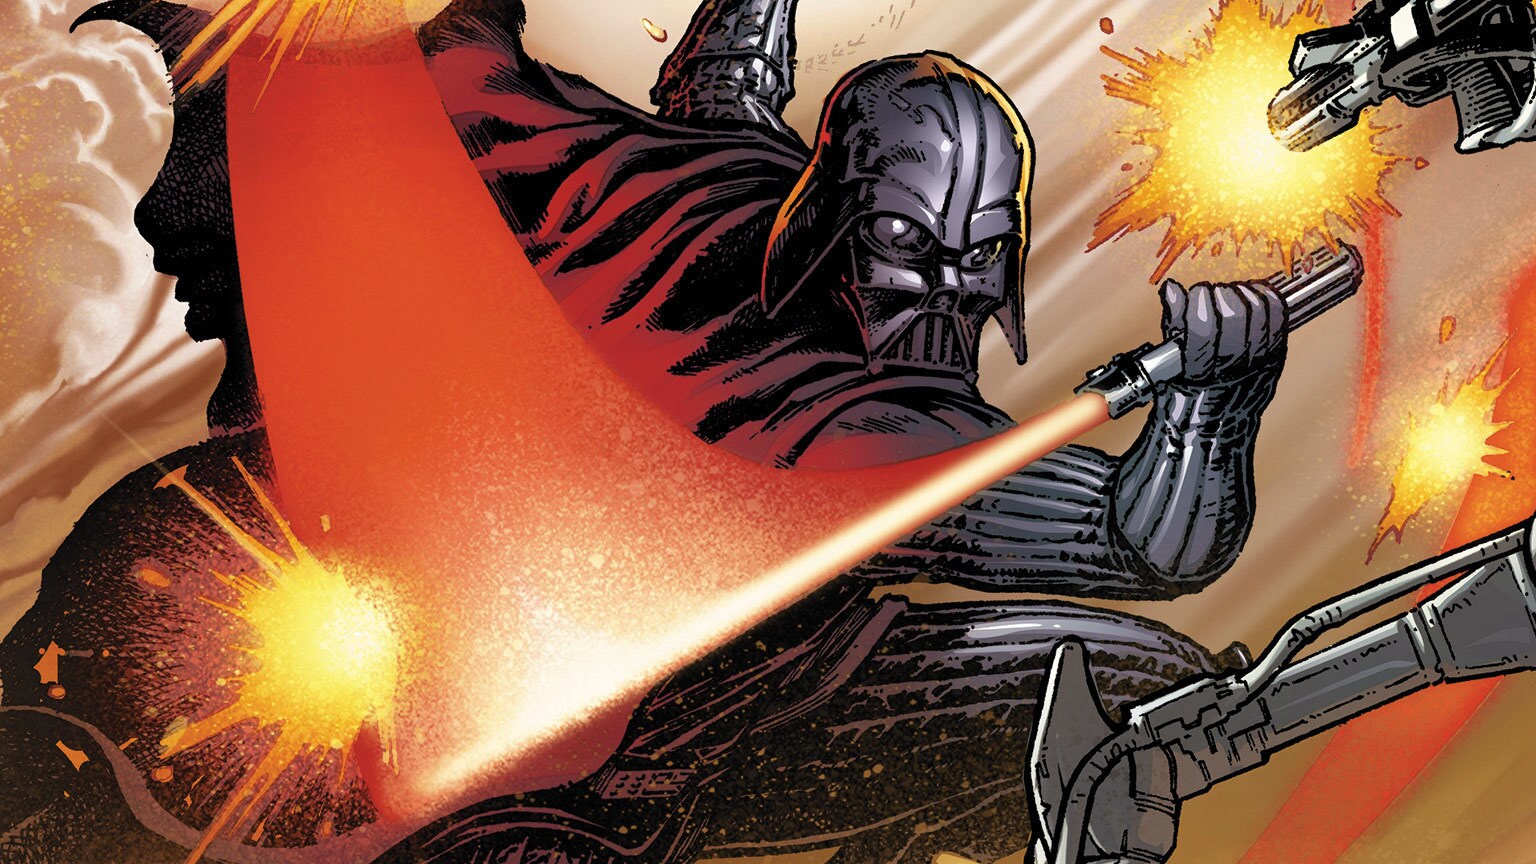 Darth Vader Takes on IG-88 in Marvel's Star Wars: Darth Vader #13 - Exclusive Preview